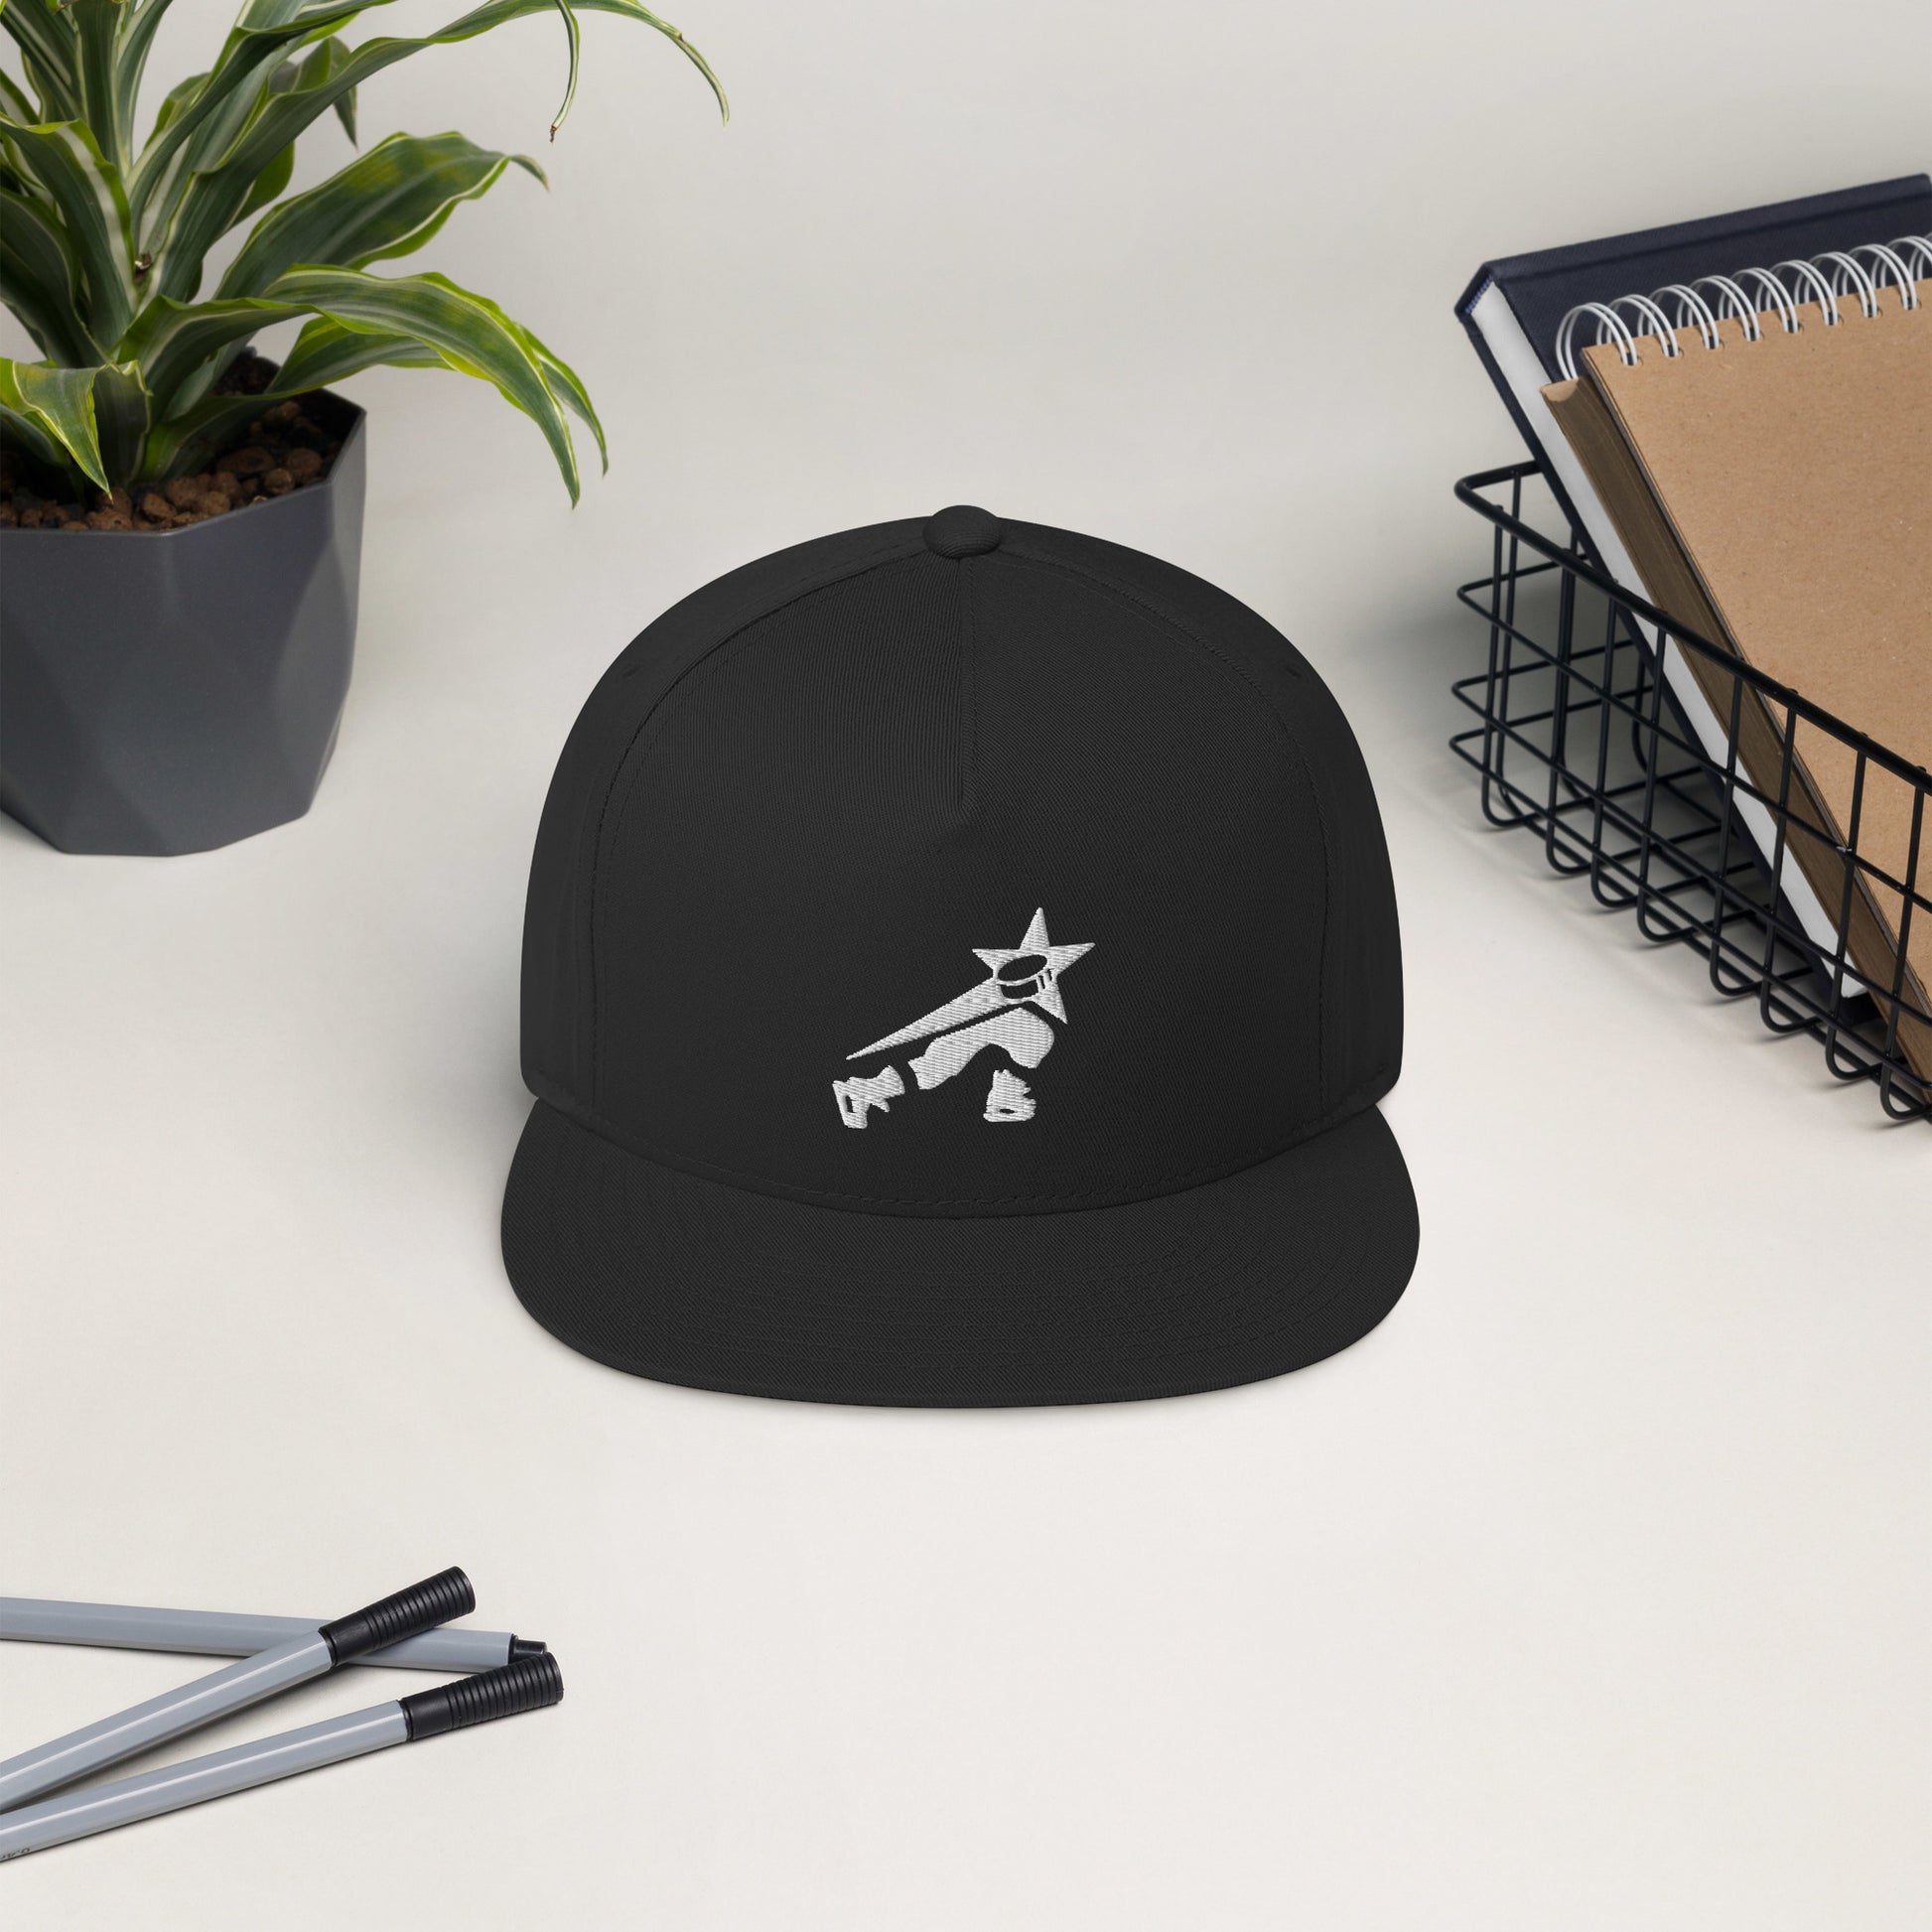 Black snapback cap with embroidered white hockey player design on a desk with pencils, notebook, and a potted plant.